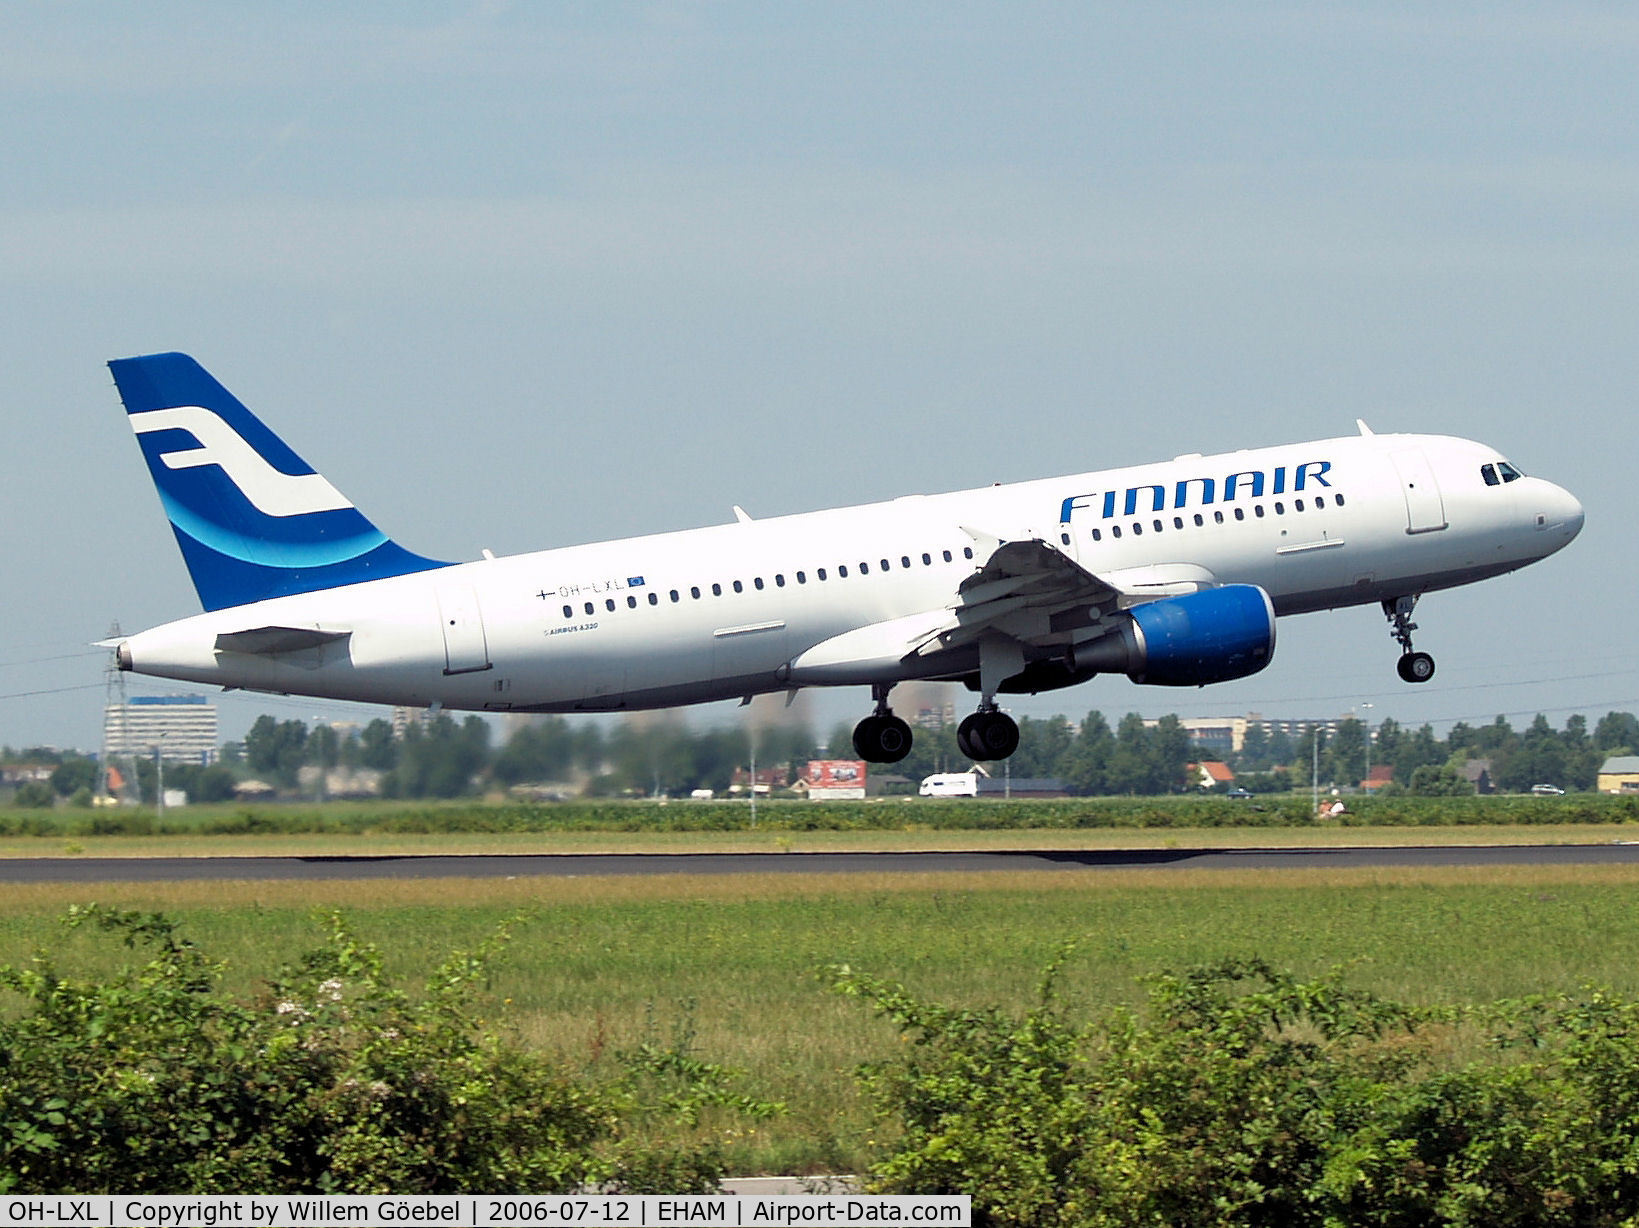 OH-LXL, 2003 Airbus A320-214 C/N 2146, Take off from runway L36 of Schiphol Airport